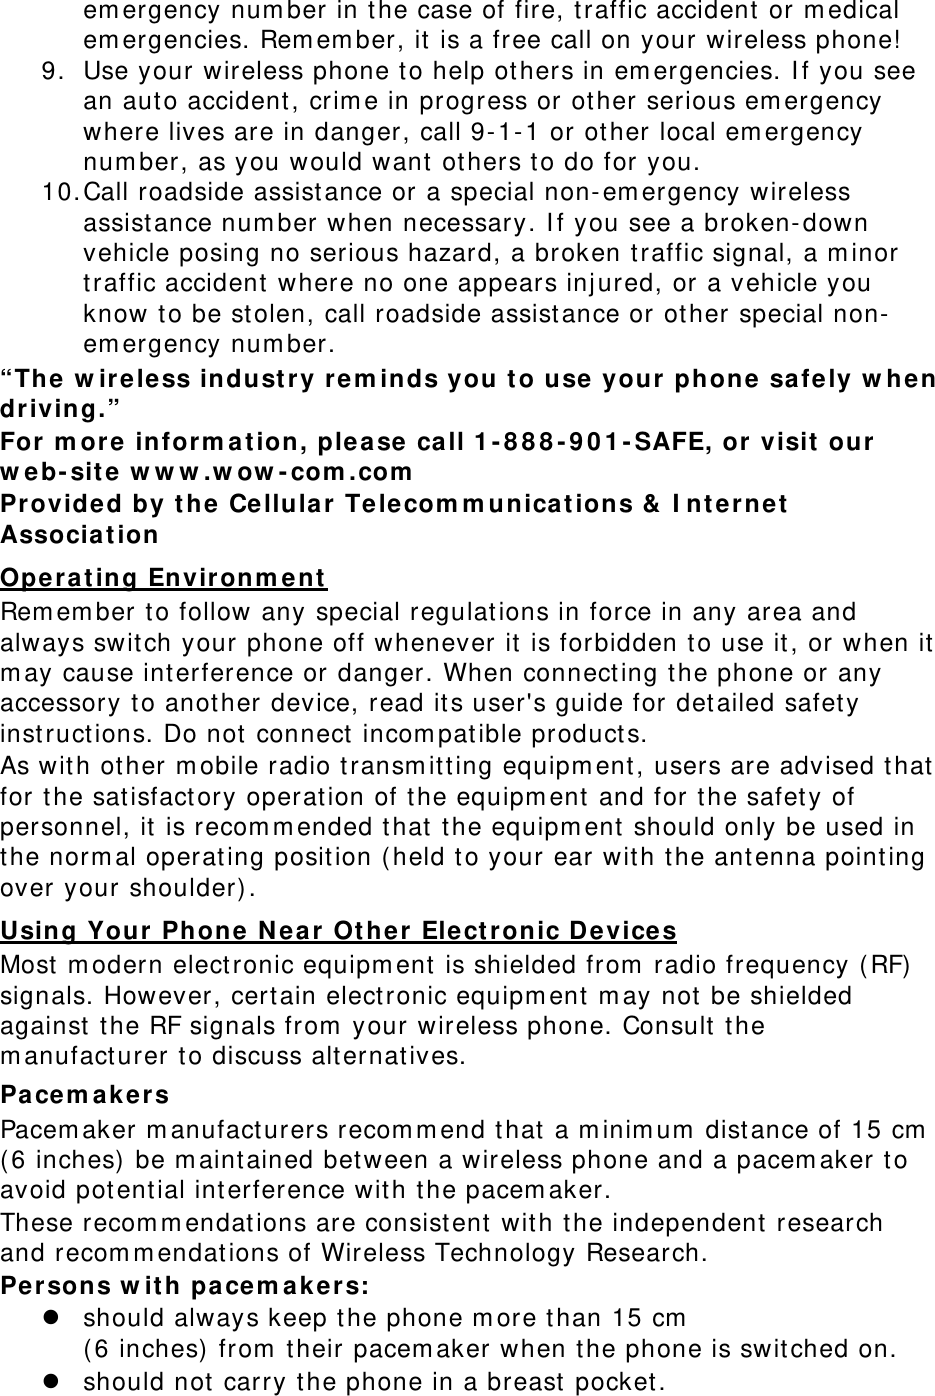 em ergency num ber in the case of fire, t raffic accident  or m edical em ergencies. Rem em ber, it is a free call on your wireless phone! 9. Use your wireless phone t o help ot hers in em ergencies. I f you see an aut o accident , crim e in progress or other serious em ergency where lives are in danger, call 9- 1- 1 or other local em ergency num ber, as you would want ot hers t o do for you. 10. Call roadside assist ance or a special non- em ergency wireless assist ance num ber when necessary. I f you see a broken- down vehicle posing no serious hazard, a broken t raffic signal, a m inor traffic accident where no one appears inj ured, or a vehicle you know t o be stolen, call roadside assistance or other special non-em ergency num ber. “The w ire le ss indu stry r e m inds you t o use your phone  safe ly  w hen driving.” For m ore  inform a t ion, plea se call 1 - 8 8 8 - 9 0 1 - SAFE, or visit  our w e b- site w w w .w ow - com .com  Provided by t he Cellula r  Telecom m unica tions &amp;  I nt ernet  Associa t ion  Oper a t ing En vironm e nt  Rem em ber t o follow any special regulat ions in force in any area and always swit ch your phone off whenever it is forbidden to use it, or when it  m ay cause int erference or danger. When connect ing t he phone or any accessory to another device, read its user&apos;s guide for det ailed safet y instructions. Do not connect  incom pat ible products. As with other m obile radio t ransm itt ing equipm ent , users are advised that for t he sat isfact ory operat ion of the equipm ent and for the safet y of personnel, it is recom m ended t hat t he equipm ent should only be used in the norm al operating posit ion ( held t o your ear wit h t he ant enna point ing over your shoulder) . Using Your Phone  N ea r  Ot he r  Elect ronic D e vices Most  m odern elect ronic equipm ent is shielded from  radio frequency ( RF) signals. However, cert ain elect ronic equipm ent m ay not be shielded against  t he RF signals from  your wireless phone. Consult t he m anufact urer t o discuss alt ernatives. Pacem a k e r s Pacem aker m anufact urers recom m end t hat a m inim um  dist ance of 15 cm  ( 6 inches)  be m aintained between a wireless phone and a pacem aker t o avoid potential int erference wit h t he pacem aker. These recom m endat ions are consist ent with t he independent  research and recom m endat ions of Wireless Technology Research. Persons w it h pa cem a k er s: z should always keep the phone m ore t han 15 cm    ( 6 inches)  from  t heir pacem aker when t he phone is switched on. z should not carry t he phone in a breast  pocket . 